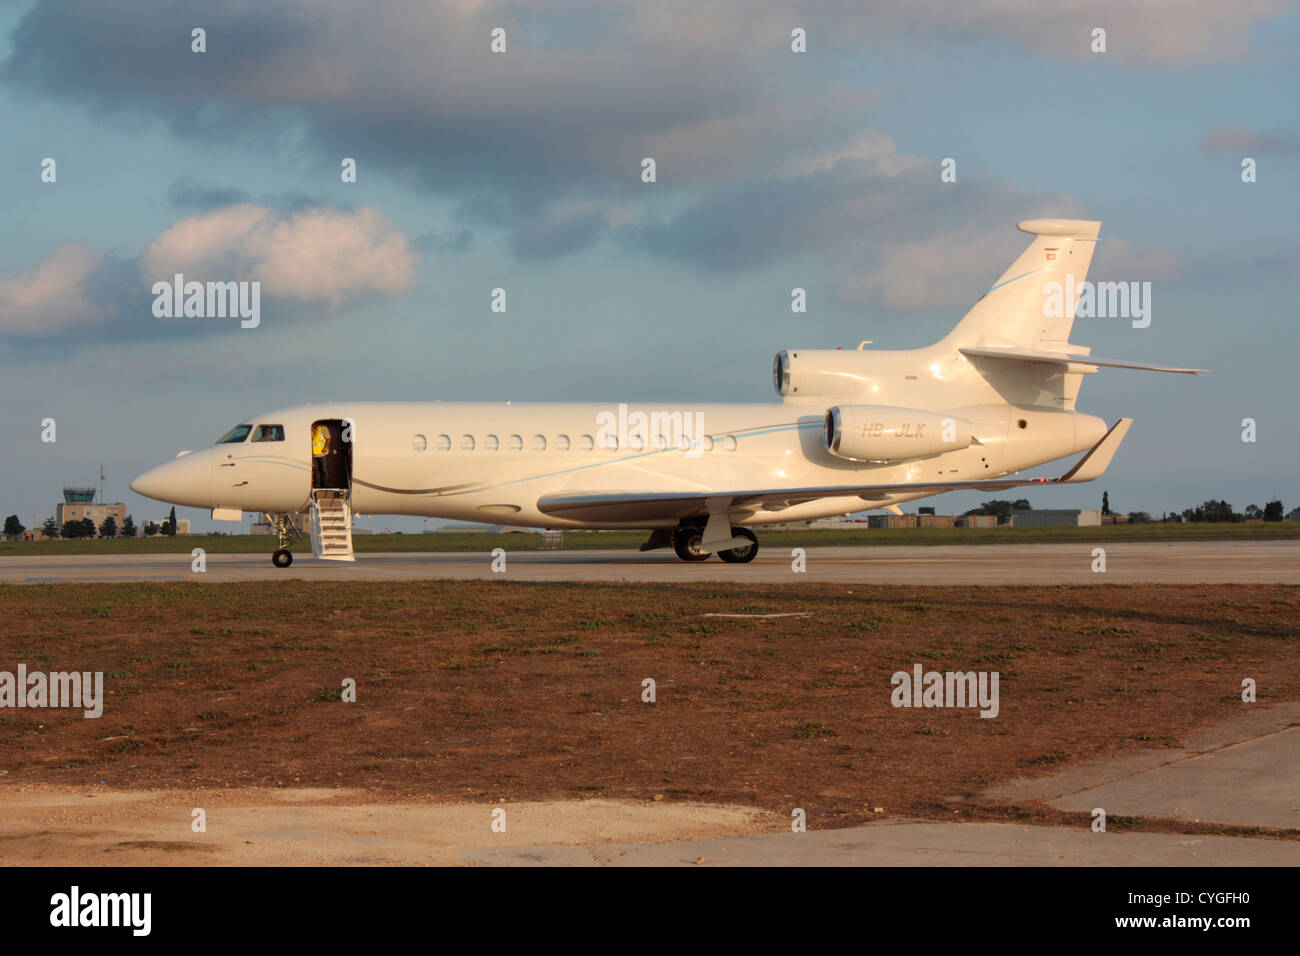 Dassault Falcon 7X business jet preparing for departure. The 7X is the flagship of Dassault's Falcon range of private jets. Stock Photo